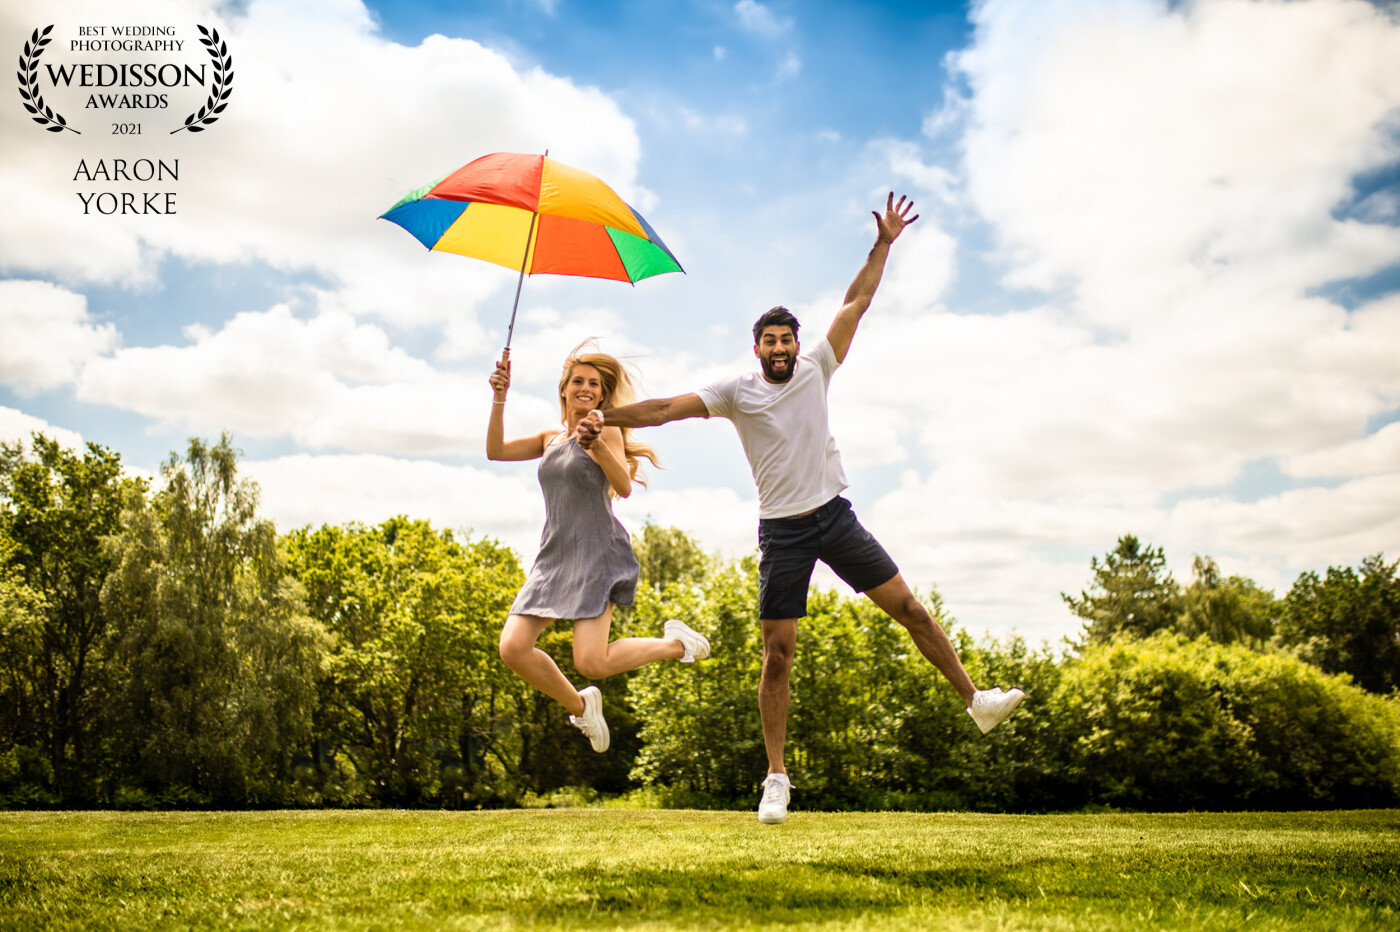 I took this shot during a pre wedding shoot at the awesome Forest of Arden in Warwickshire. The couple were up for anything creative and fun, so I took this umbrella and we tried loads of different positions, I like this one the best!